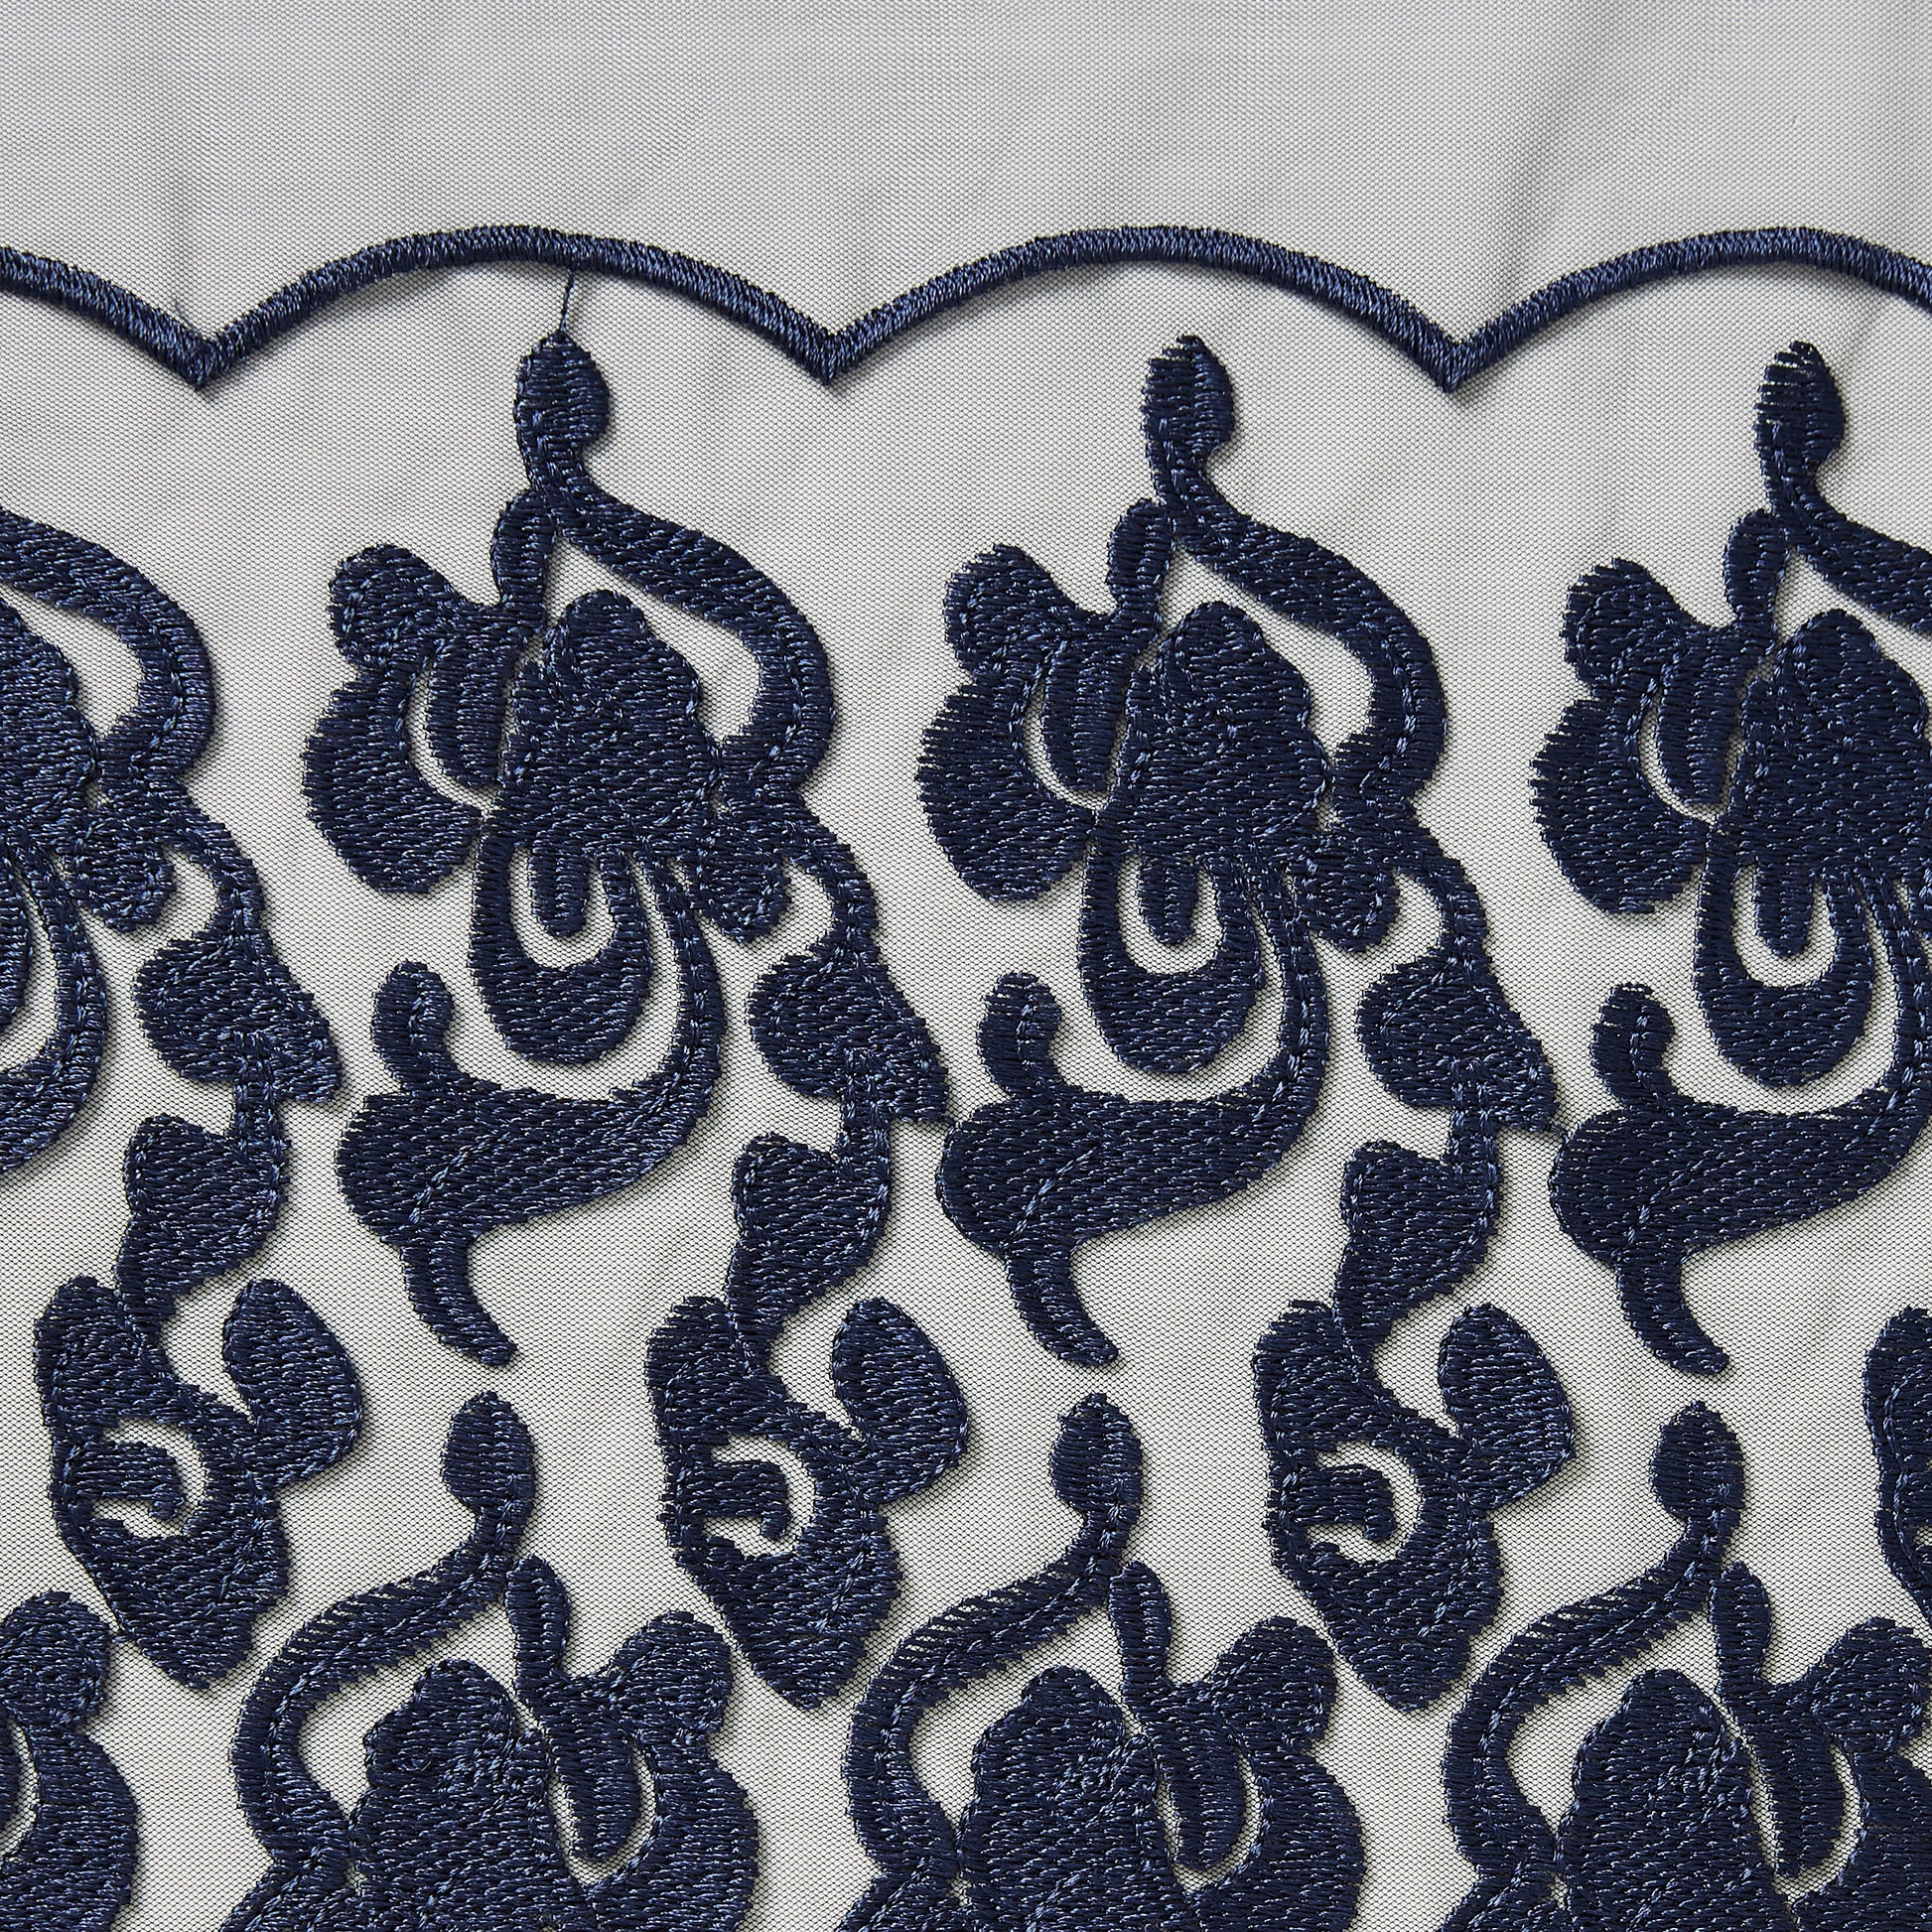 brooklyn showing the navy color version floral embroidery on rayon and polyester mesh base scalloped